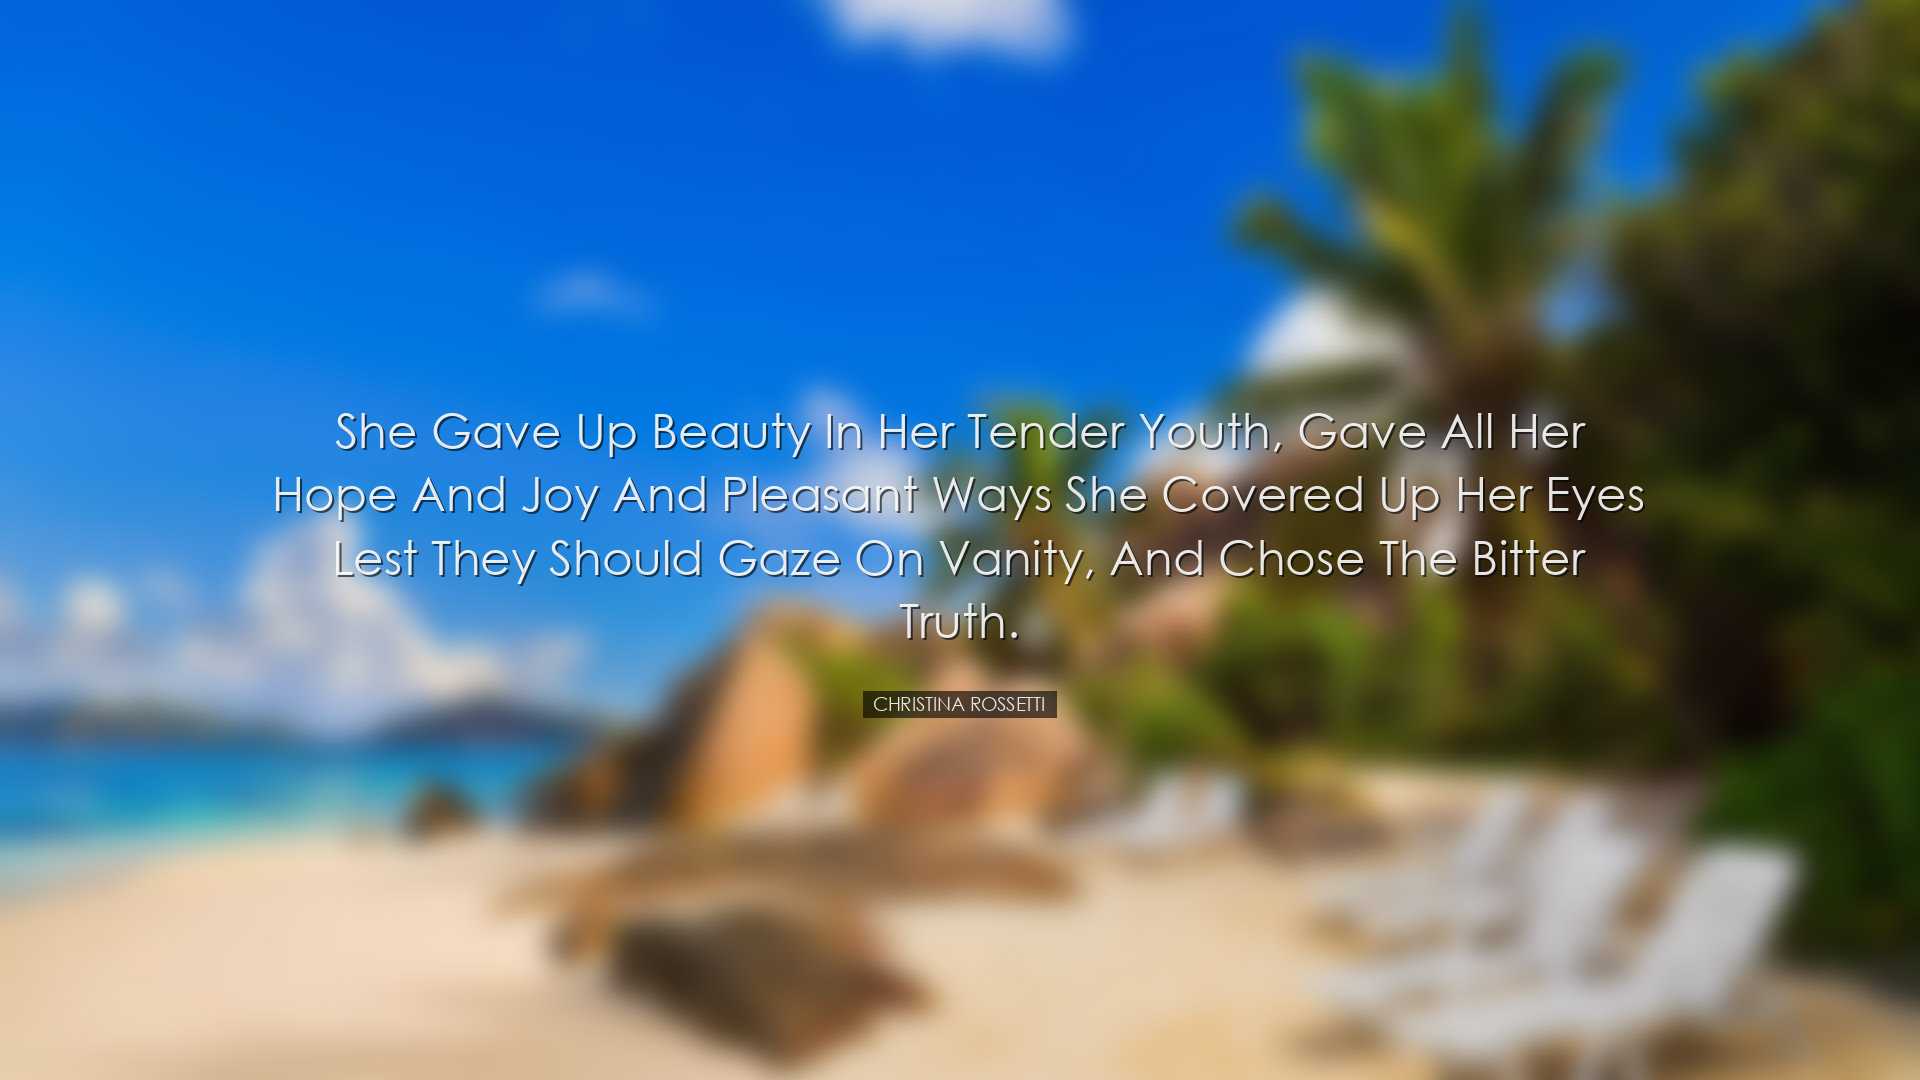 She gave up beauty in her tender youth, gave all her hope and joy